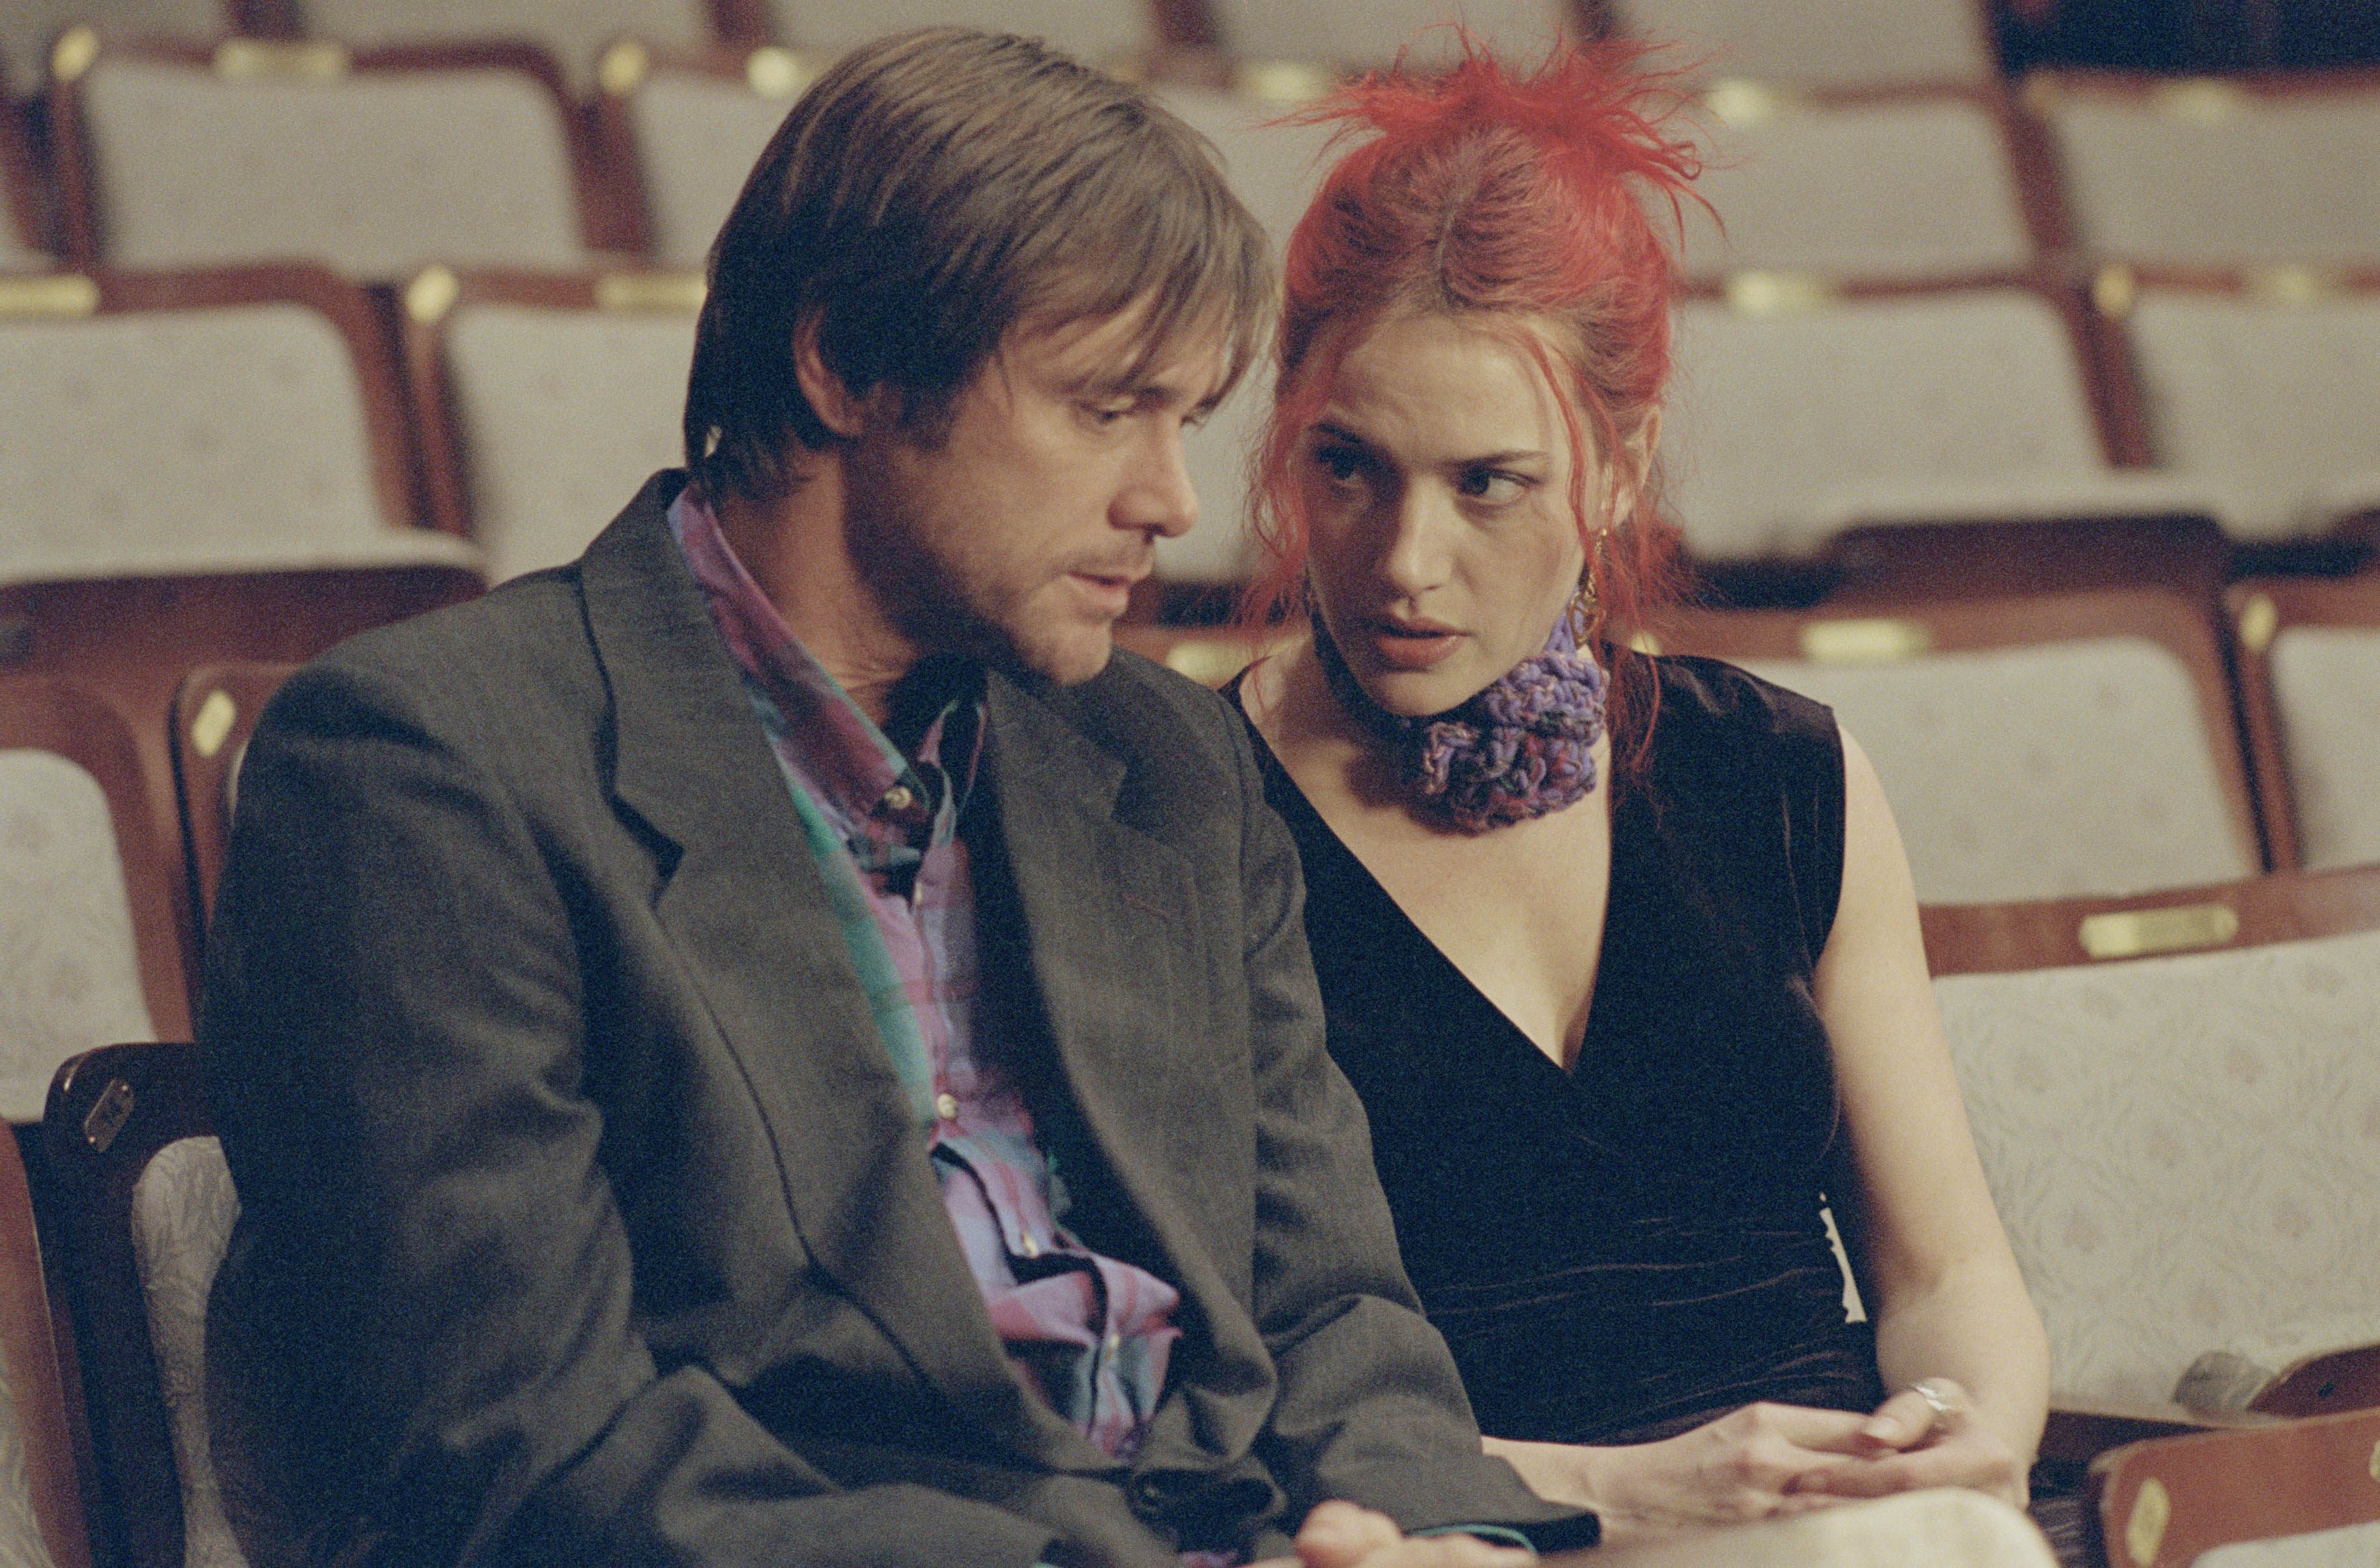 Jim Carrey (left) and Kate Winslet in a still from Eternal Sunshine of the Spotless Mind.